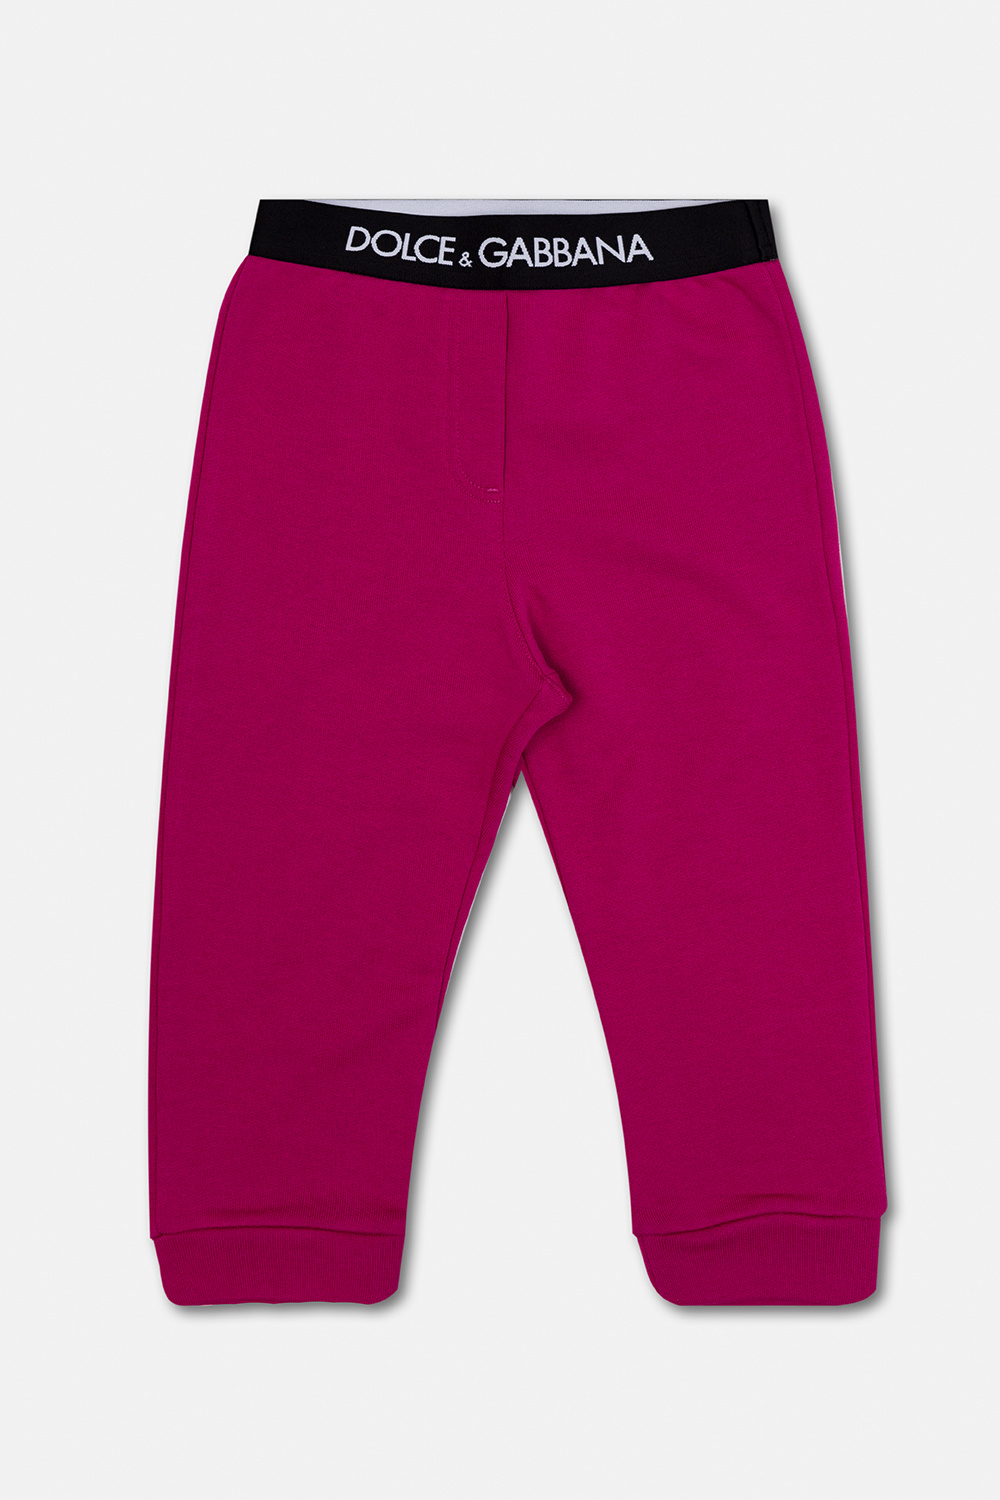 Dolce & Gabbana Kids Cotton Performance trousers with logo